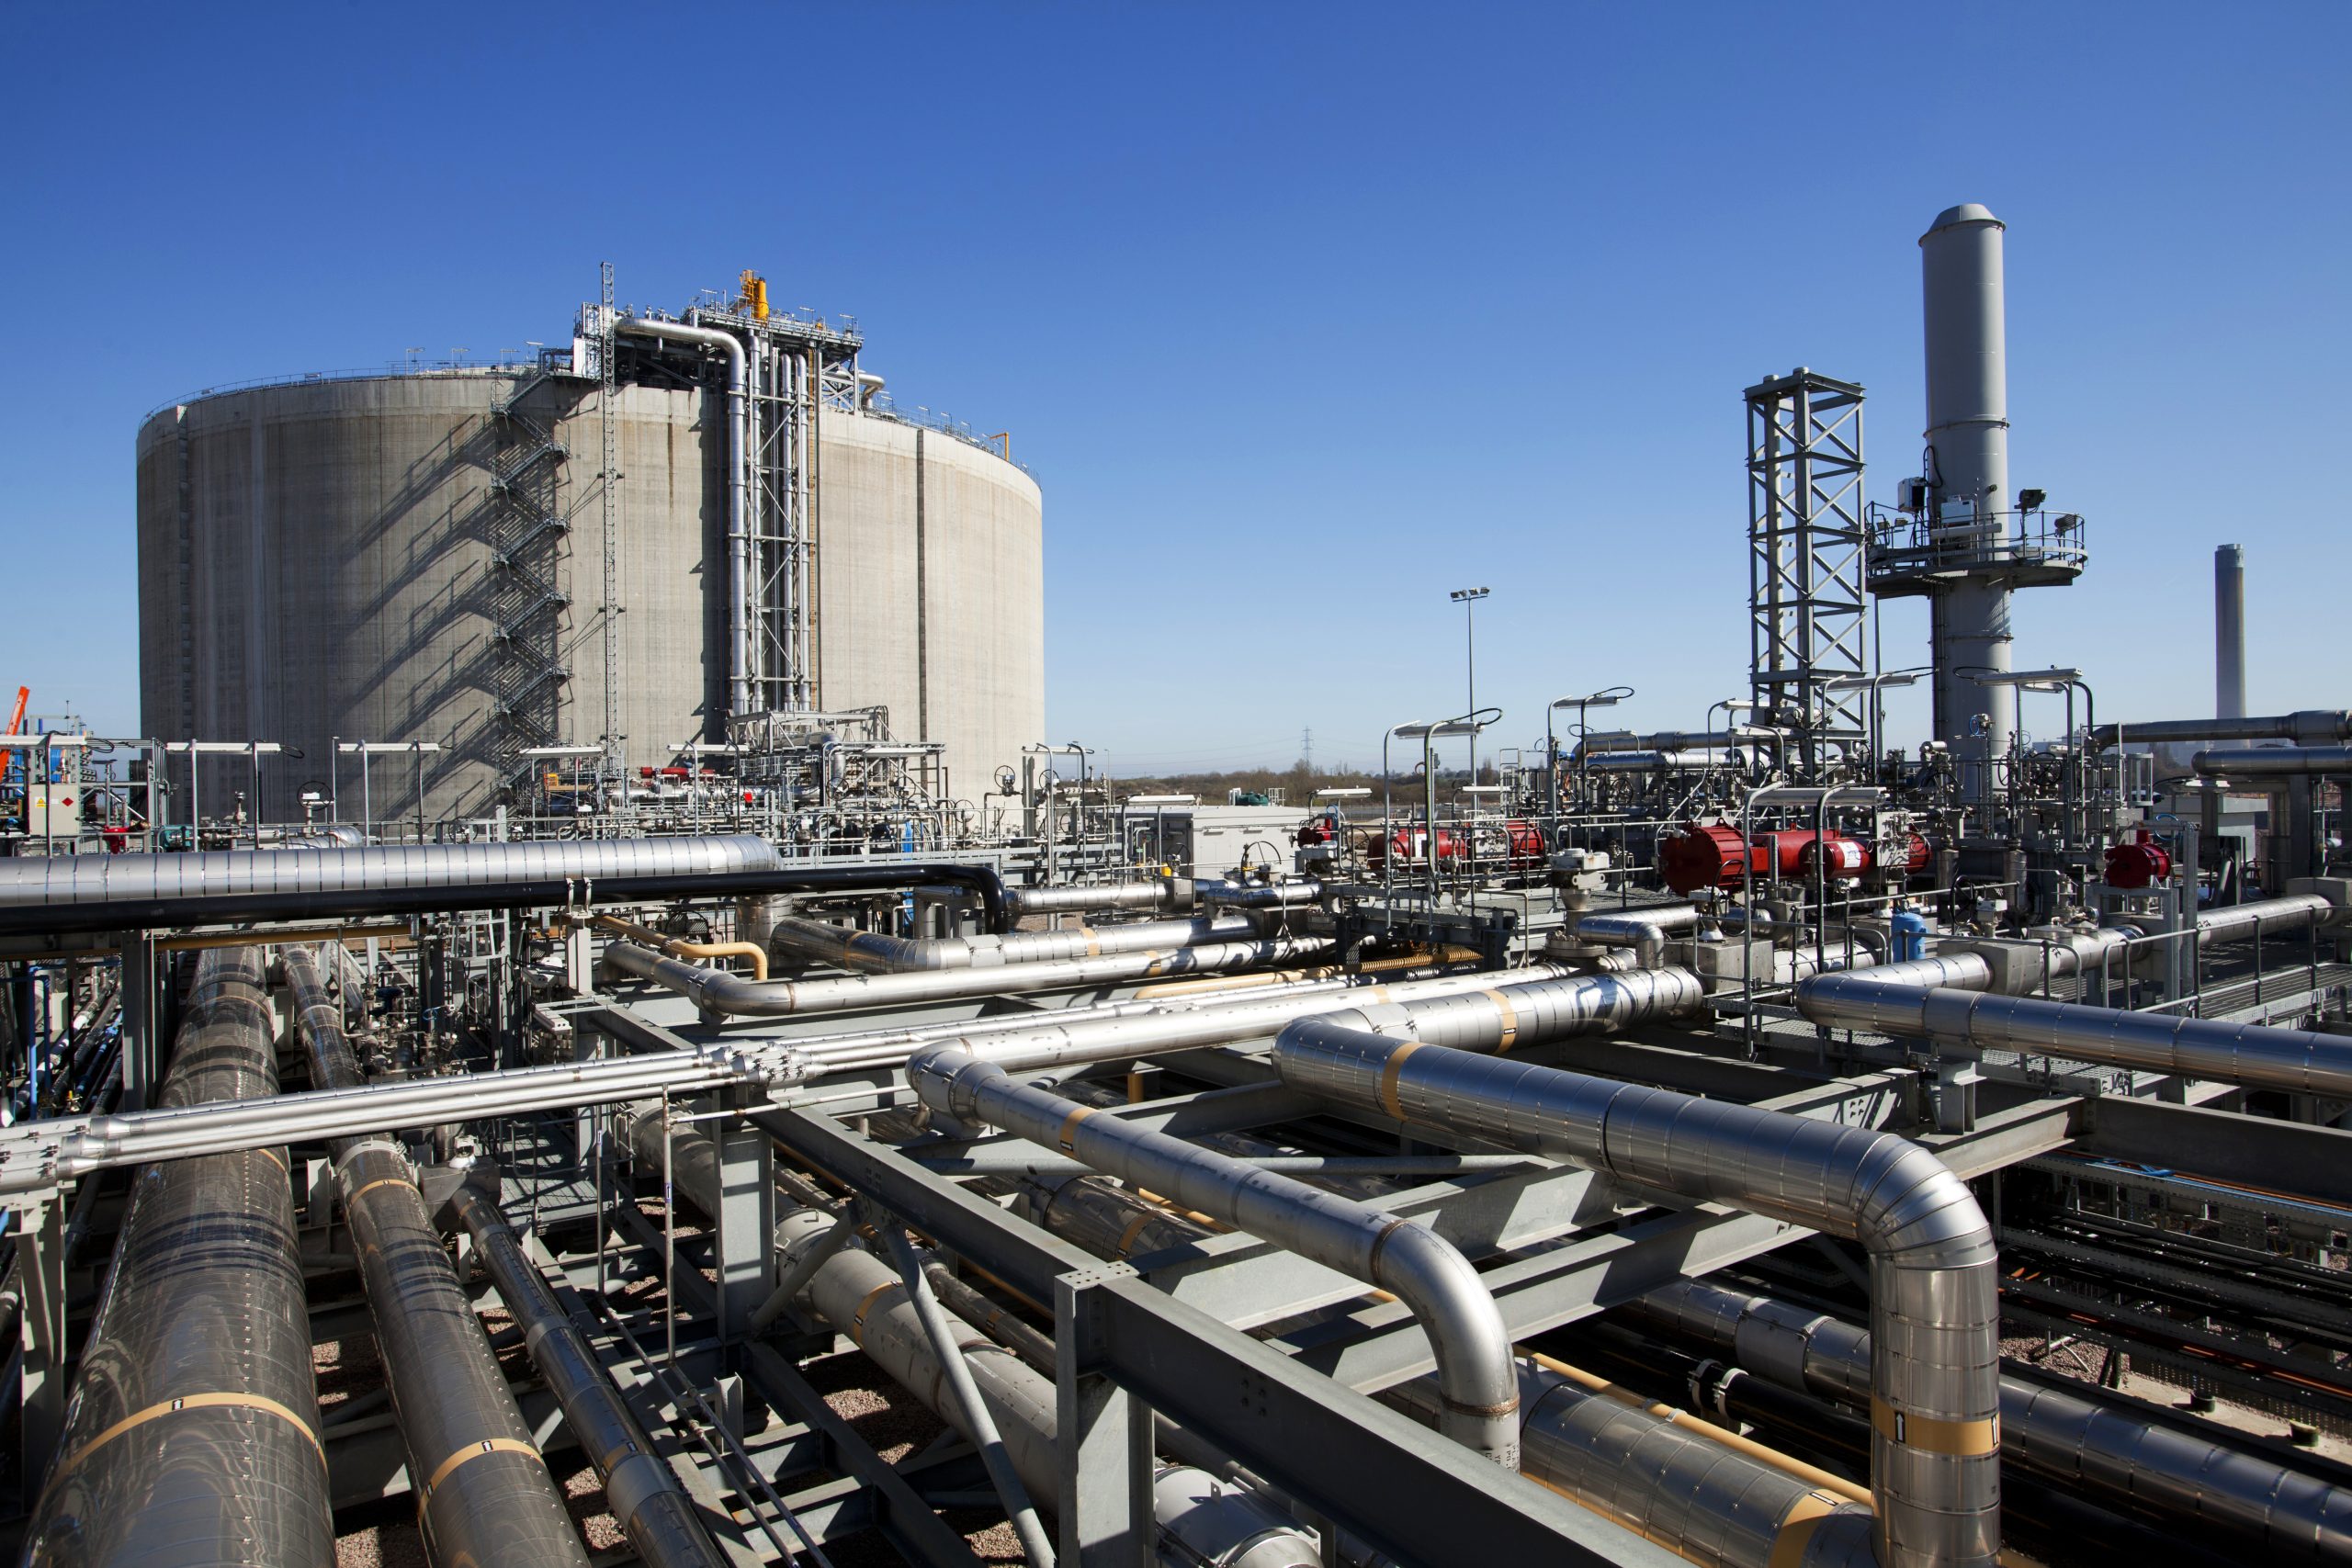 National Grid to sell Grain LNG terminal